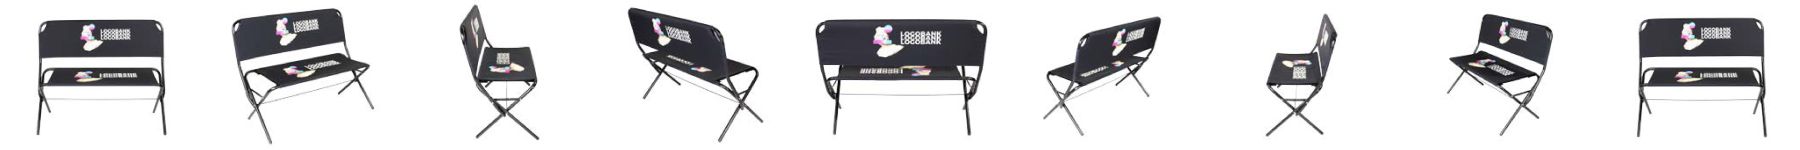 Foldable Seat Bench